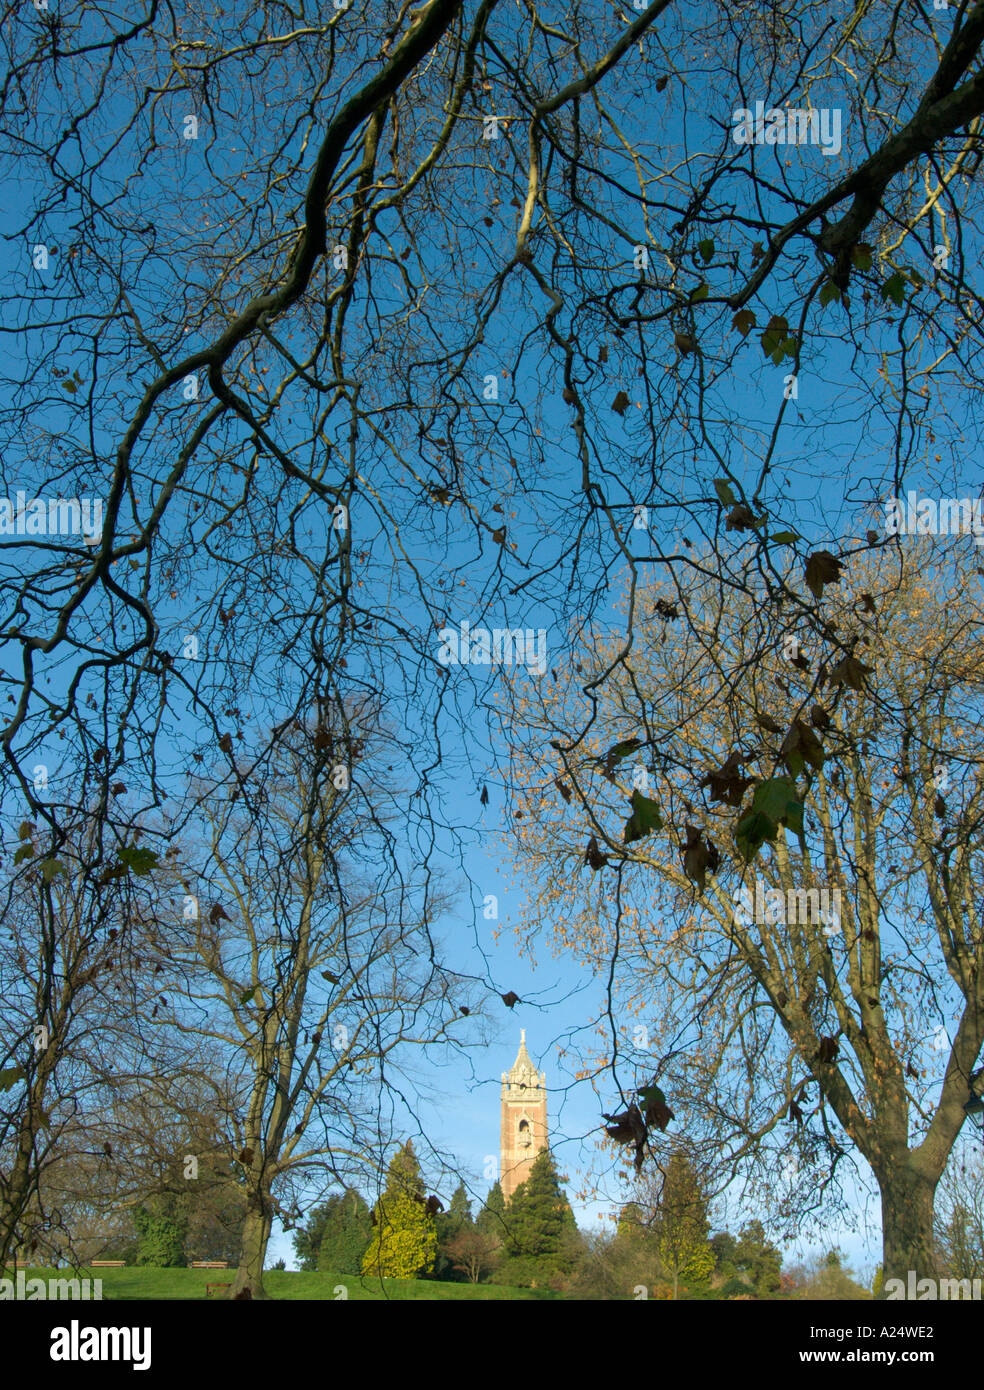 Brandon Hill Bristol view of Cabot Tower with London Plane trees in front Stock Photo